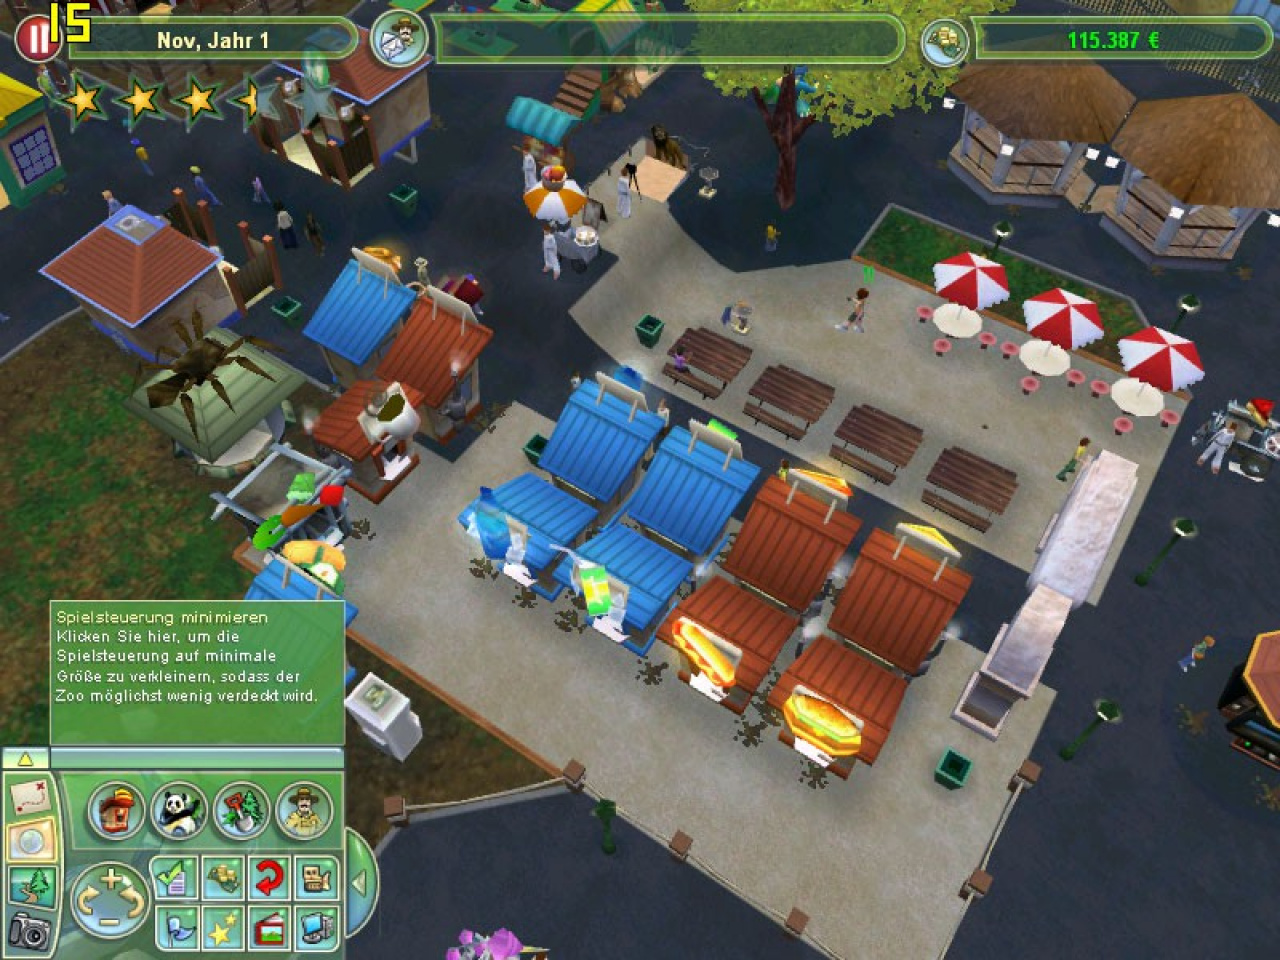 Download Zoo Tycoon 2: Endangered Species for Windows 